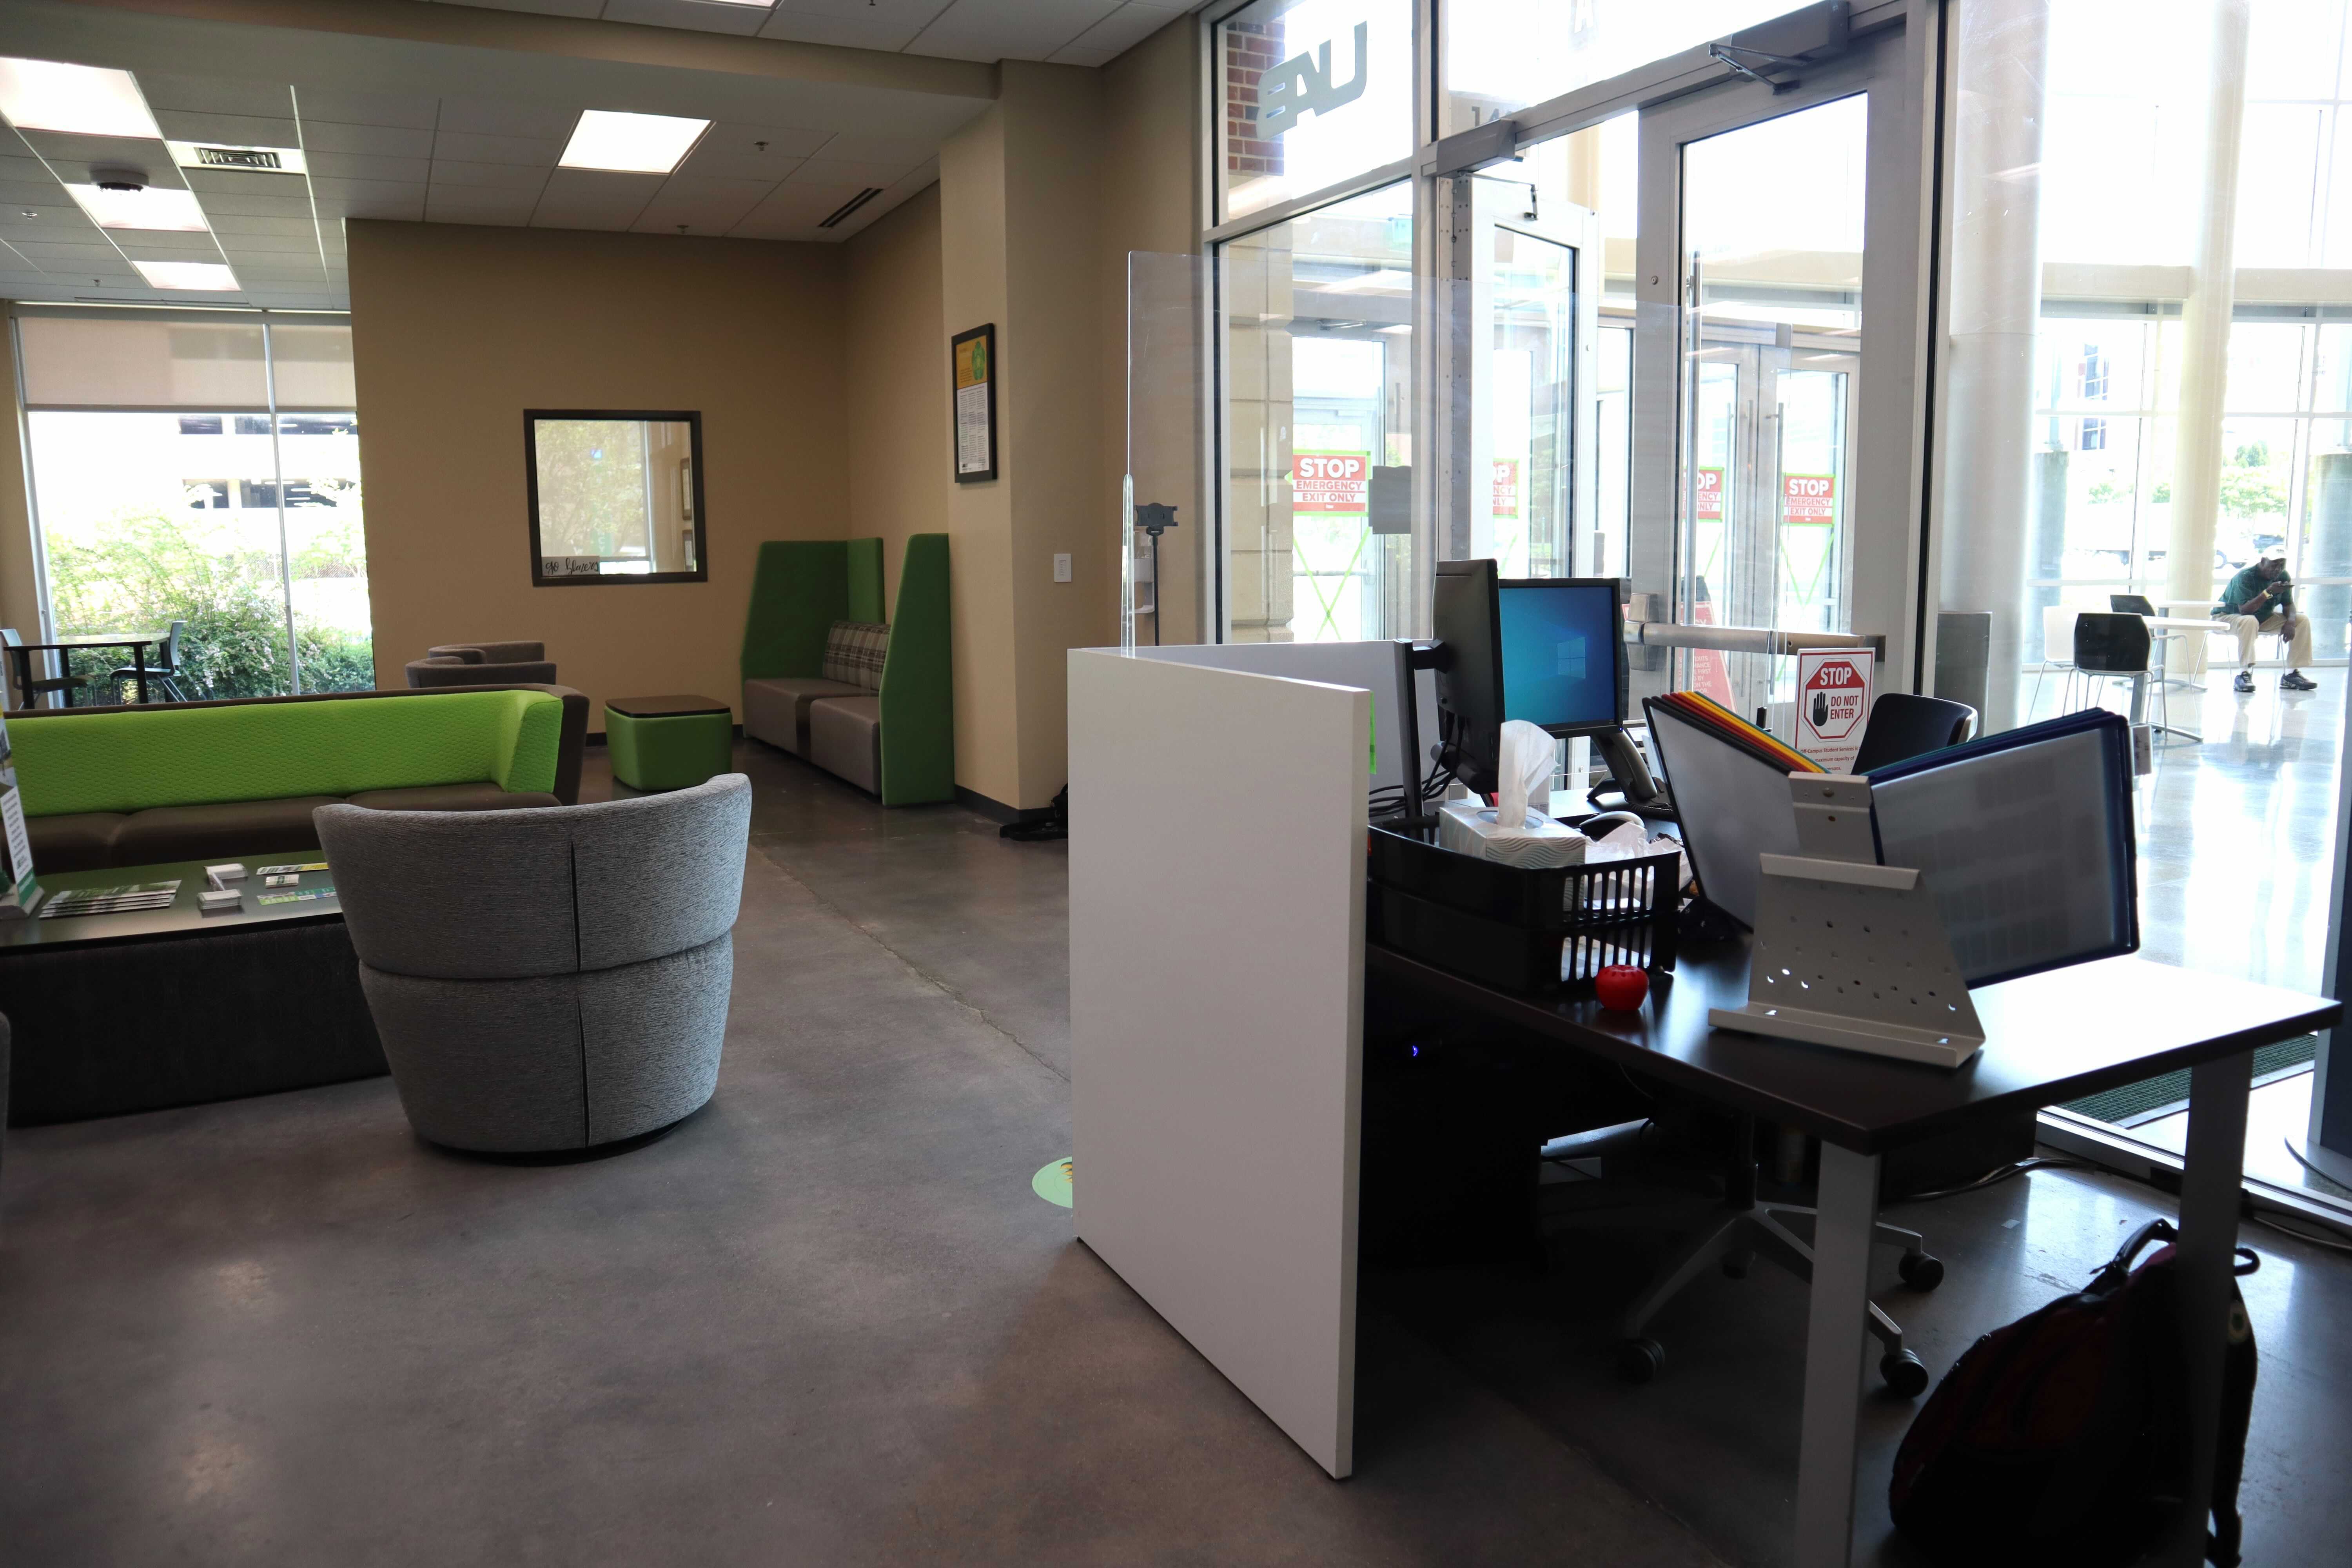 Off-Campus Student lounge with reception desk in view